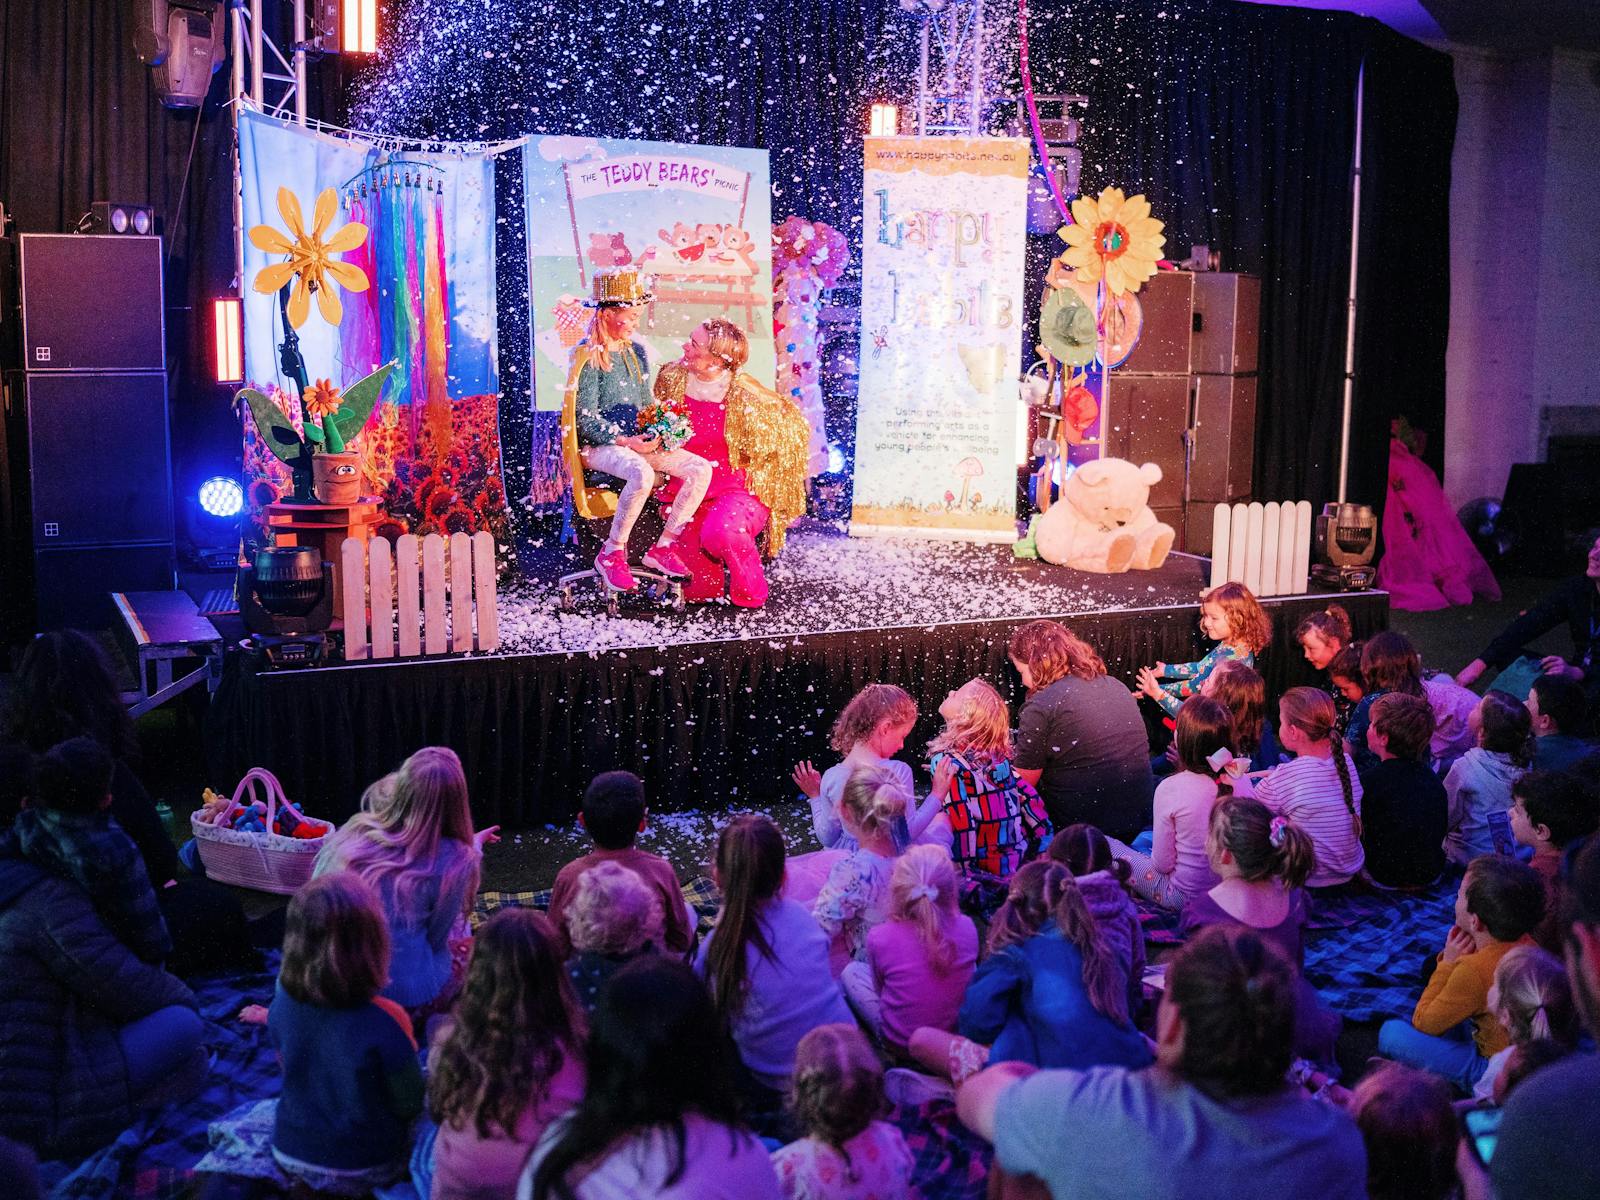 Colourful lit stage with children's performer and crowd of young children audience members